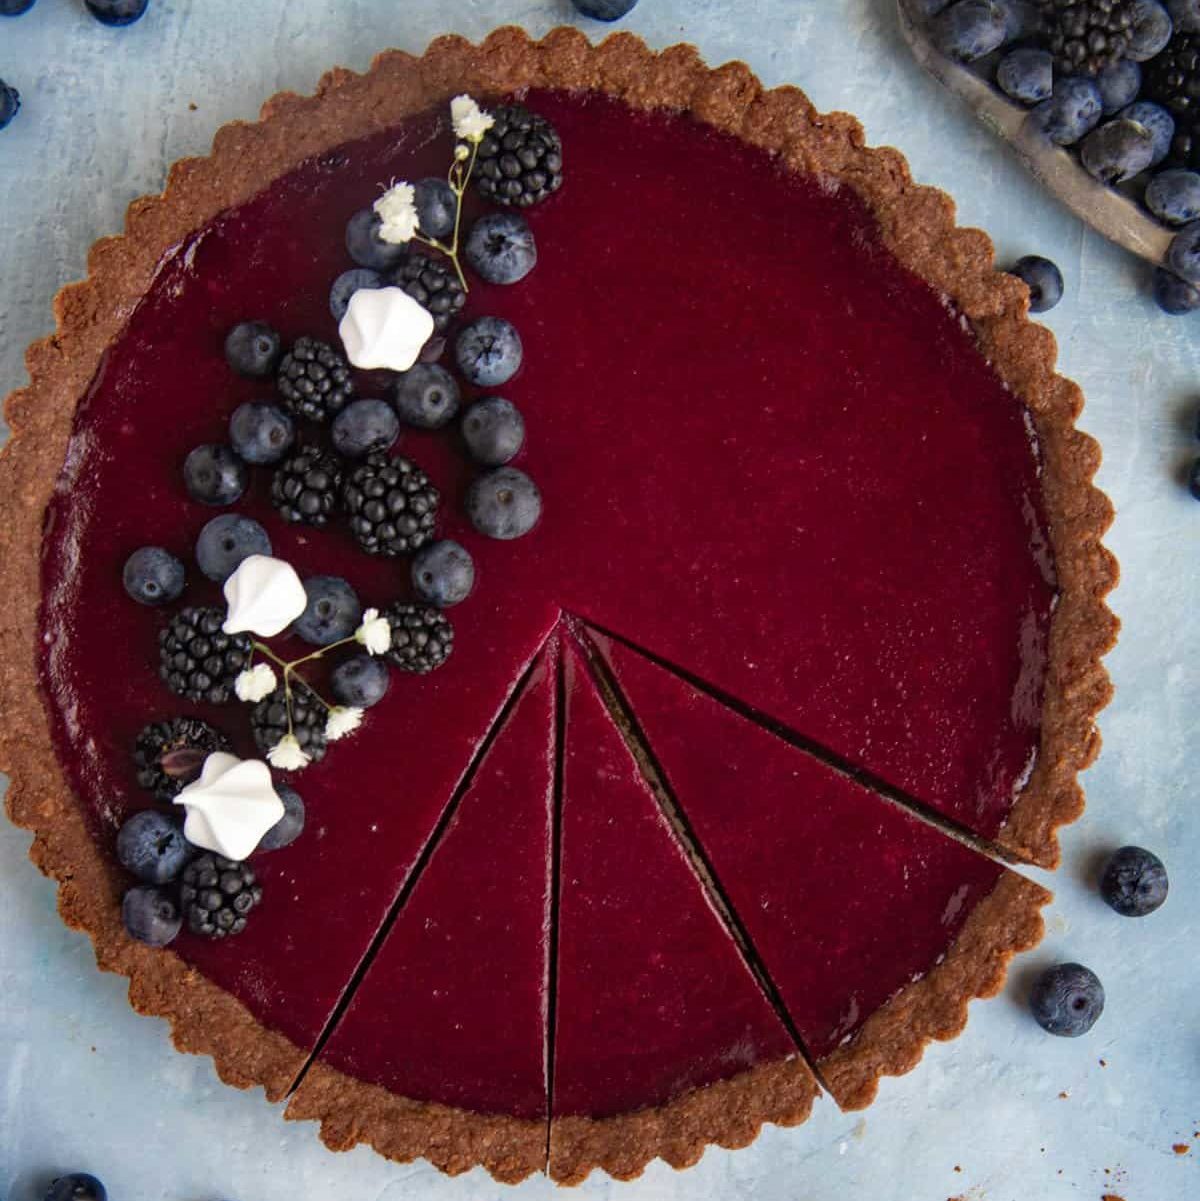 Blueberry Tart with Chocolate Cookie Crust